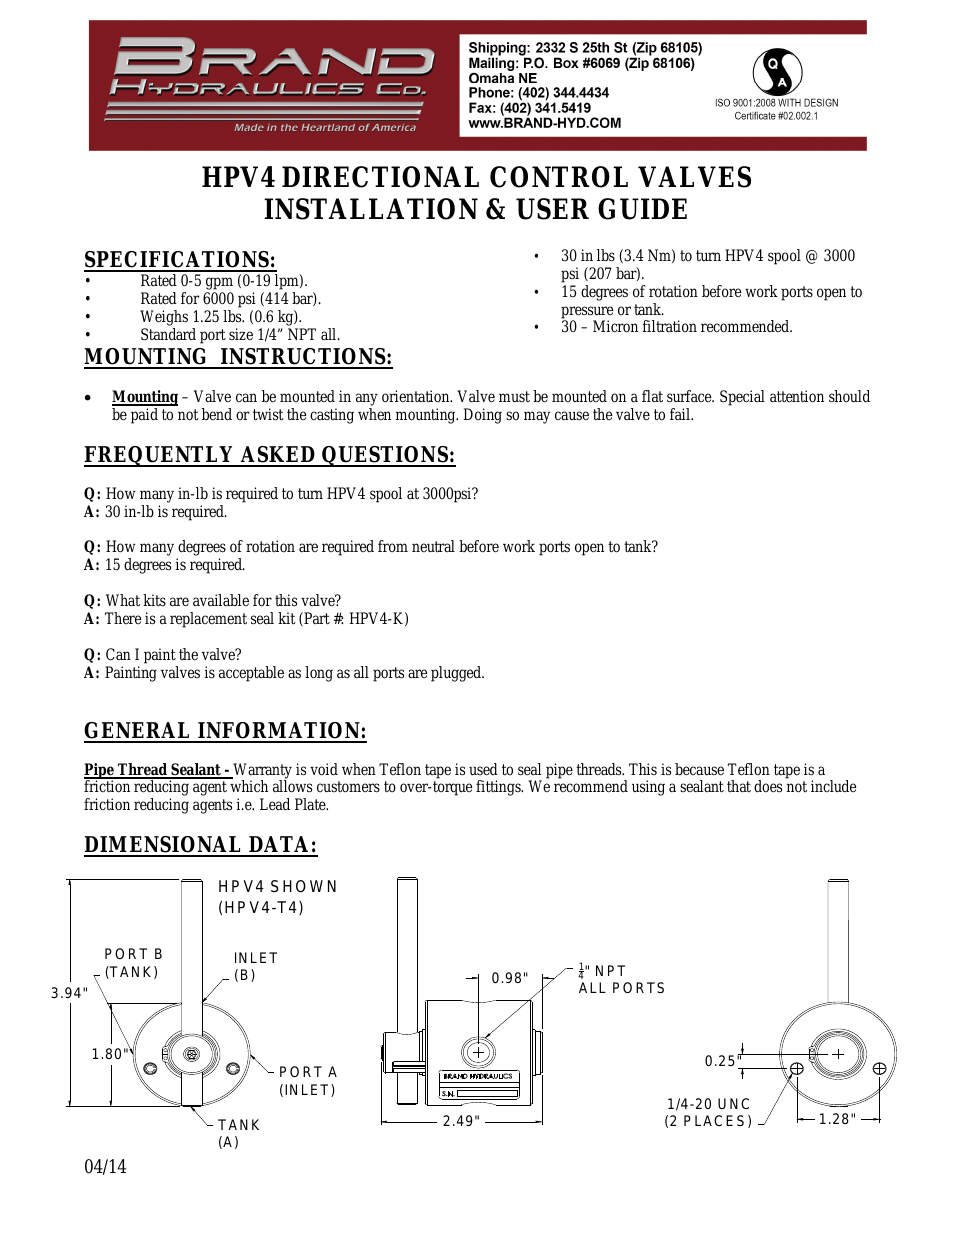 HPV4 DIRECTIONAL CONTROL VALVES